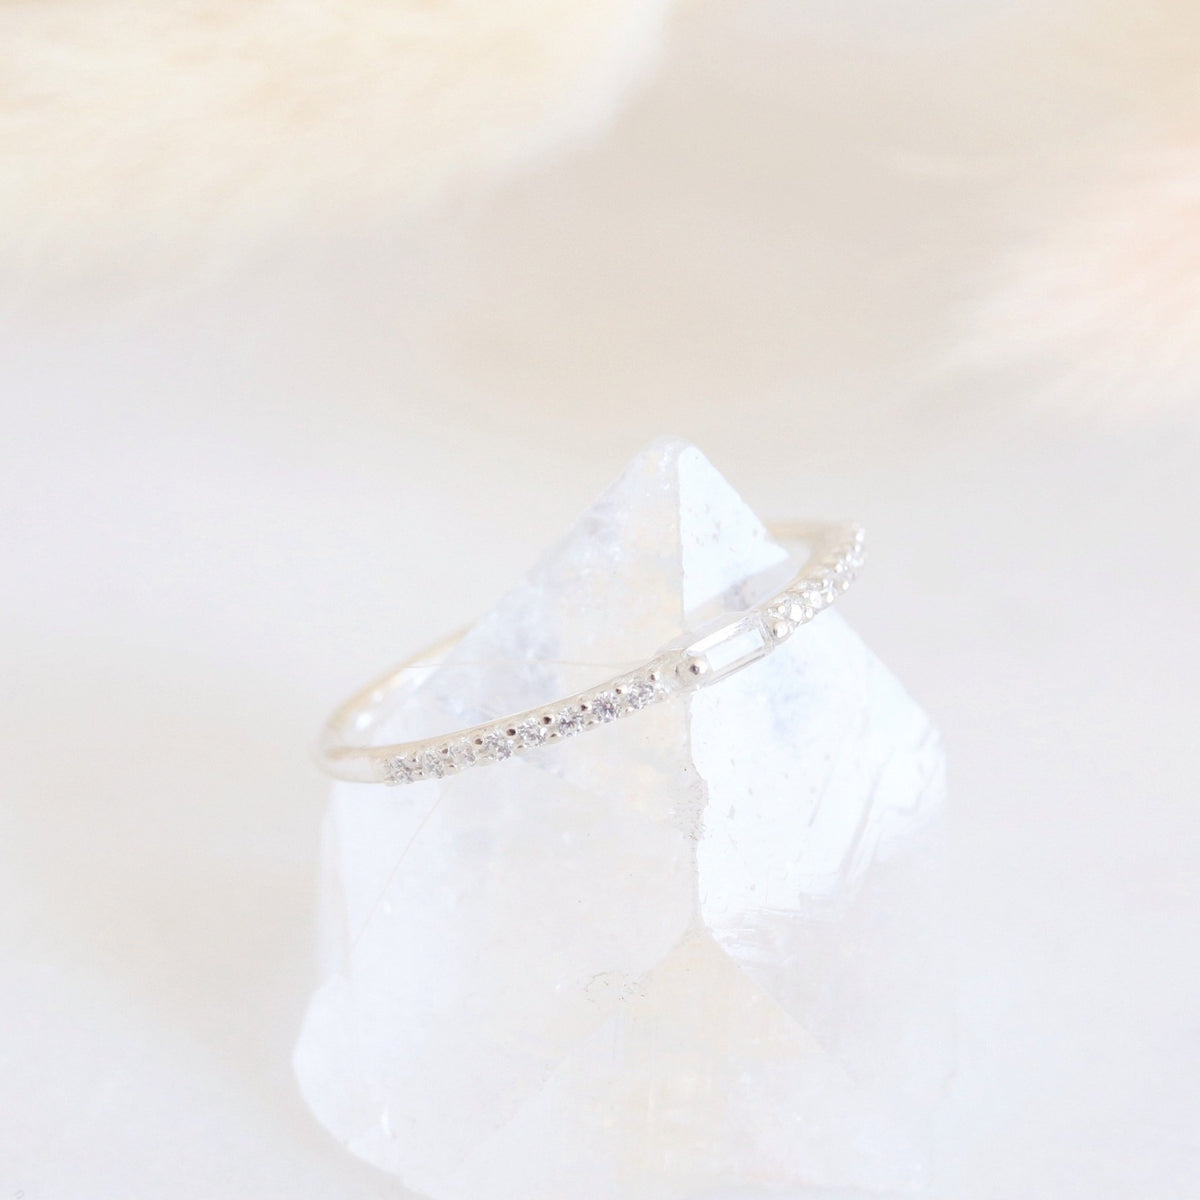 Loyal Prism Stacking Ring - White Topaz &amp; Silver - SO PRETTY CARA COTTER